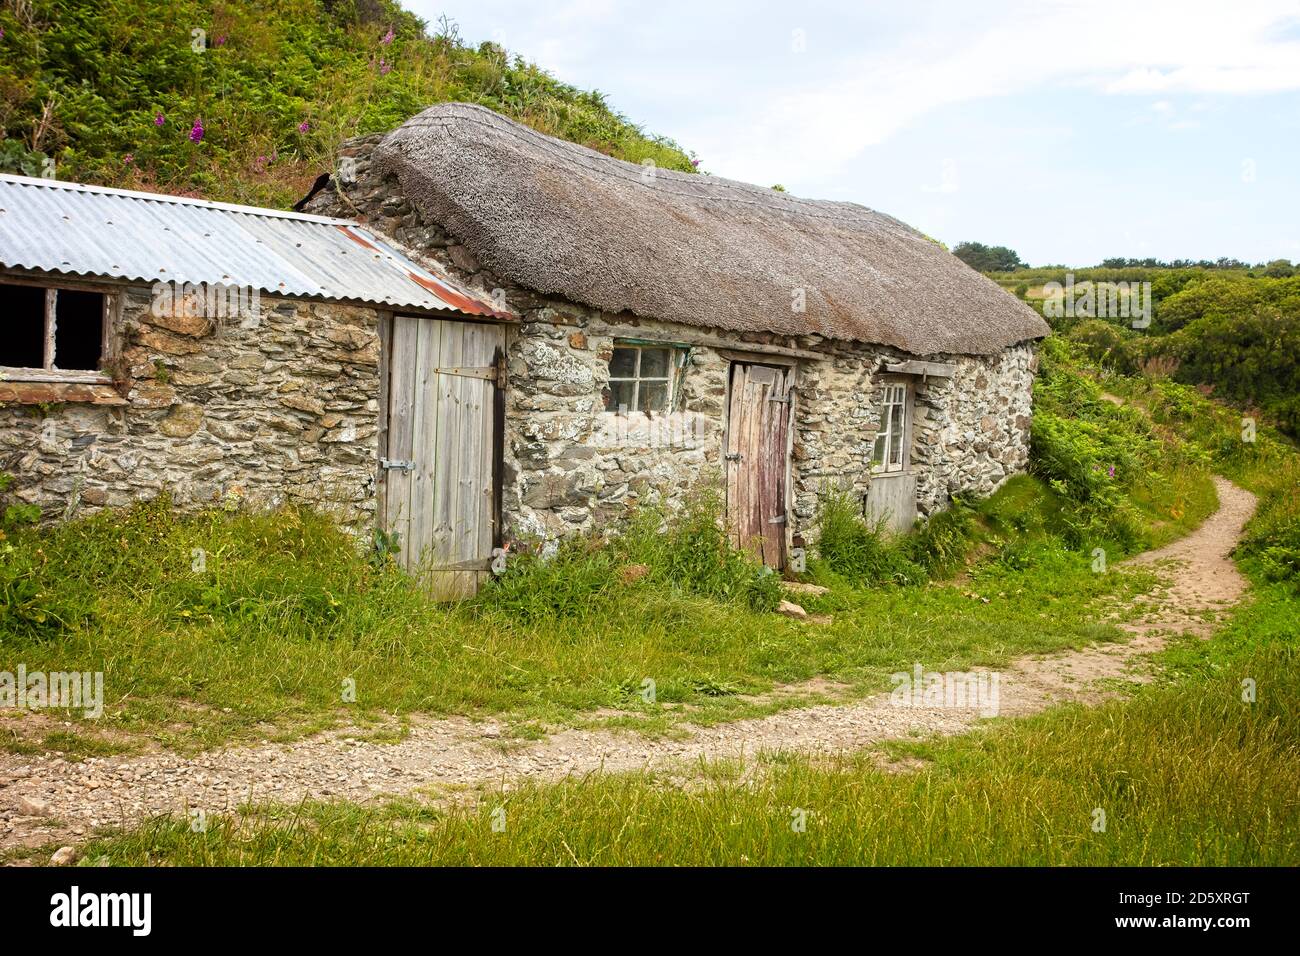 An ancient, thatched, fisherman's hut, Prussia Cove, Cornwall, England, UK. Stock Photo